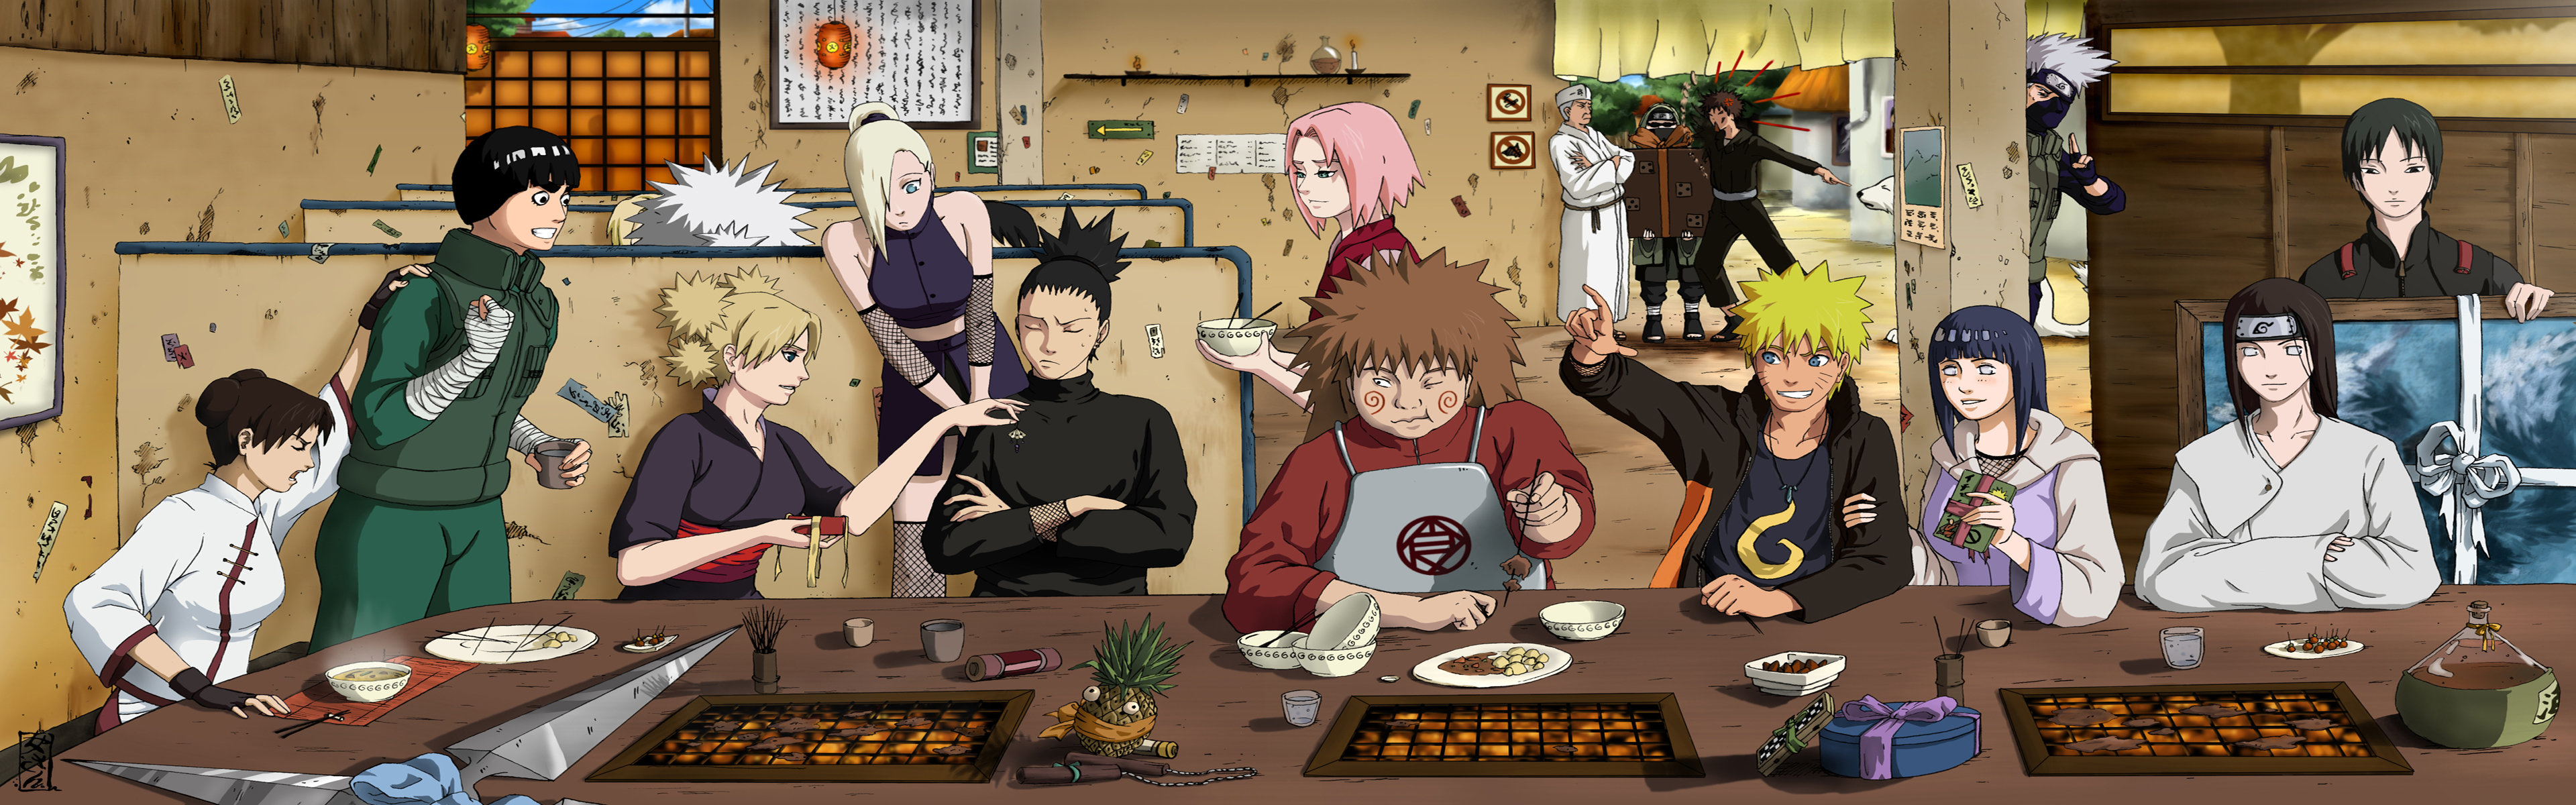 High Resolution Naruto Dual Monitor Background Id - Naruto Version Of The Last Supper - HD Wallpaper 